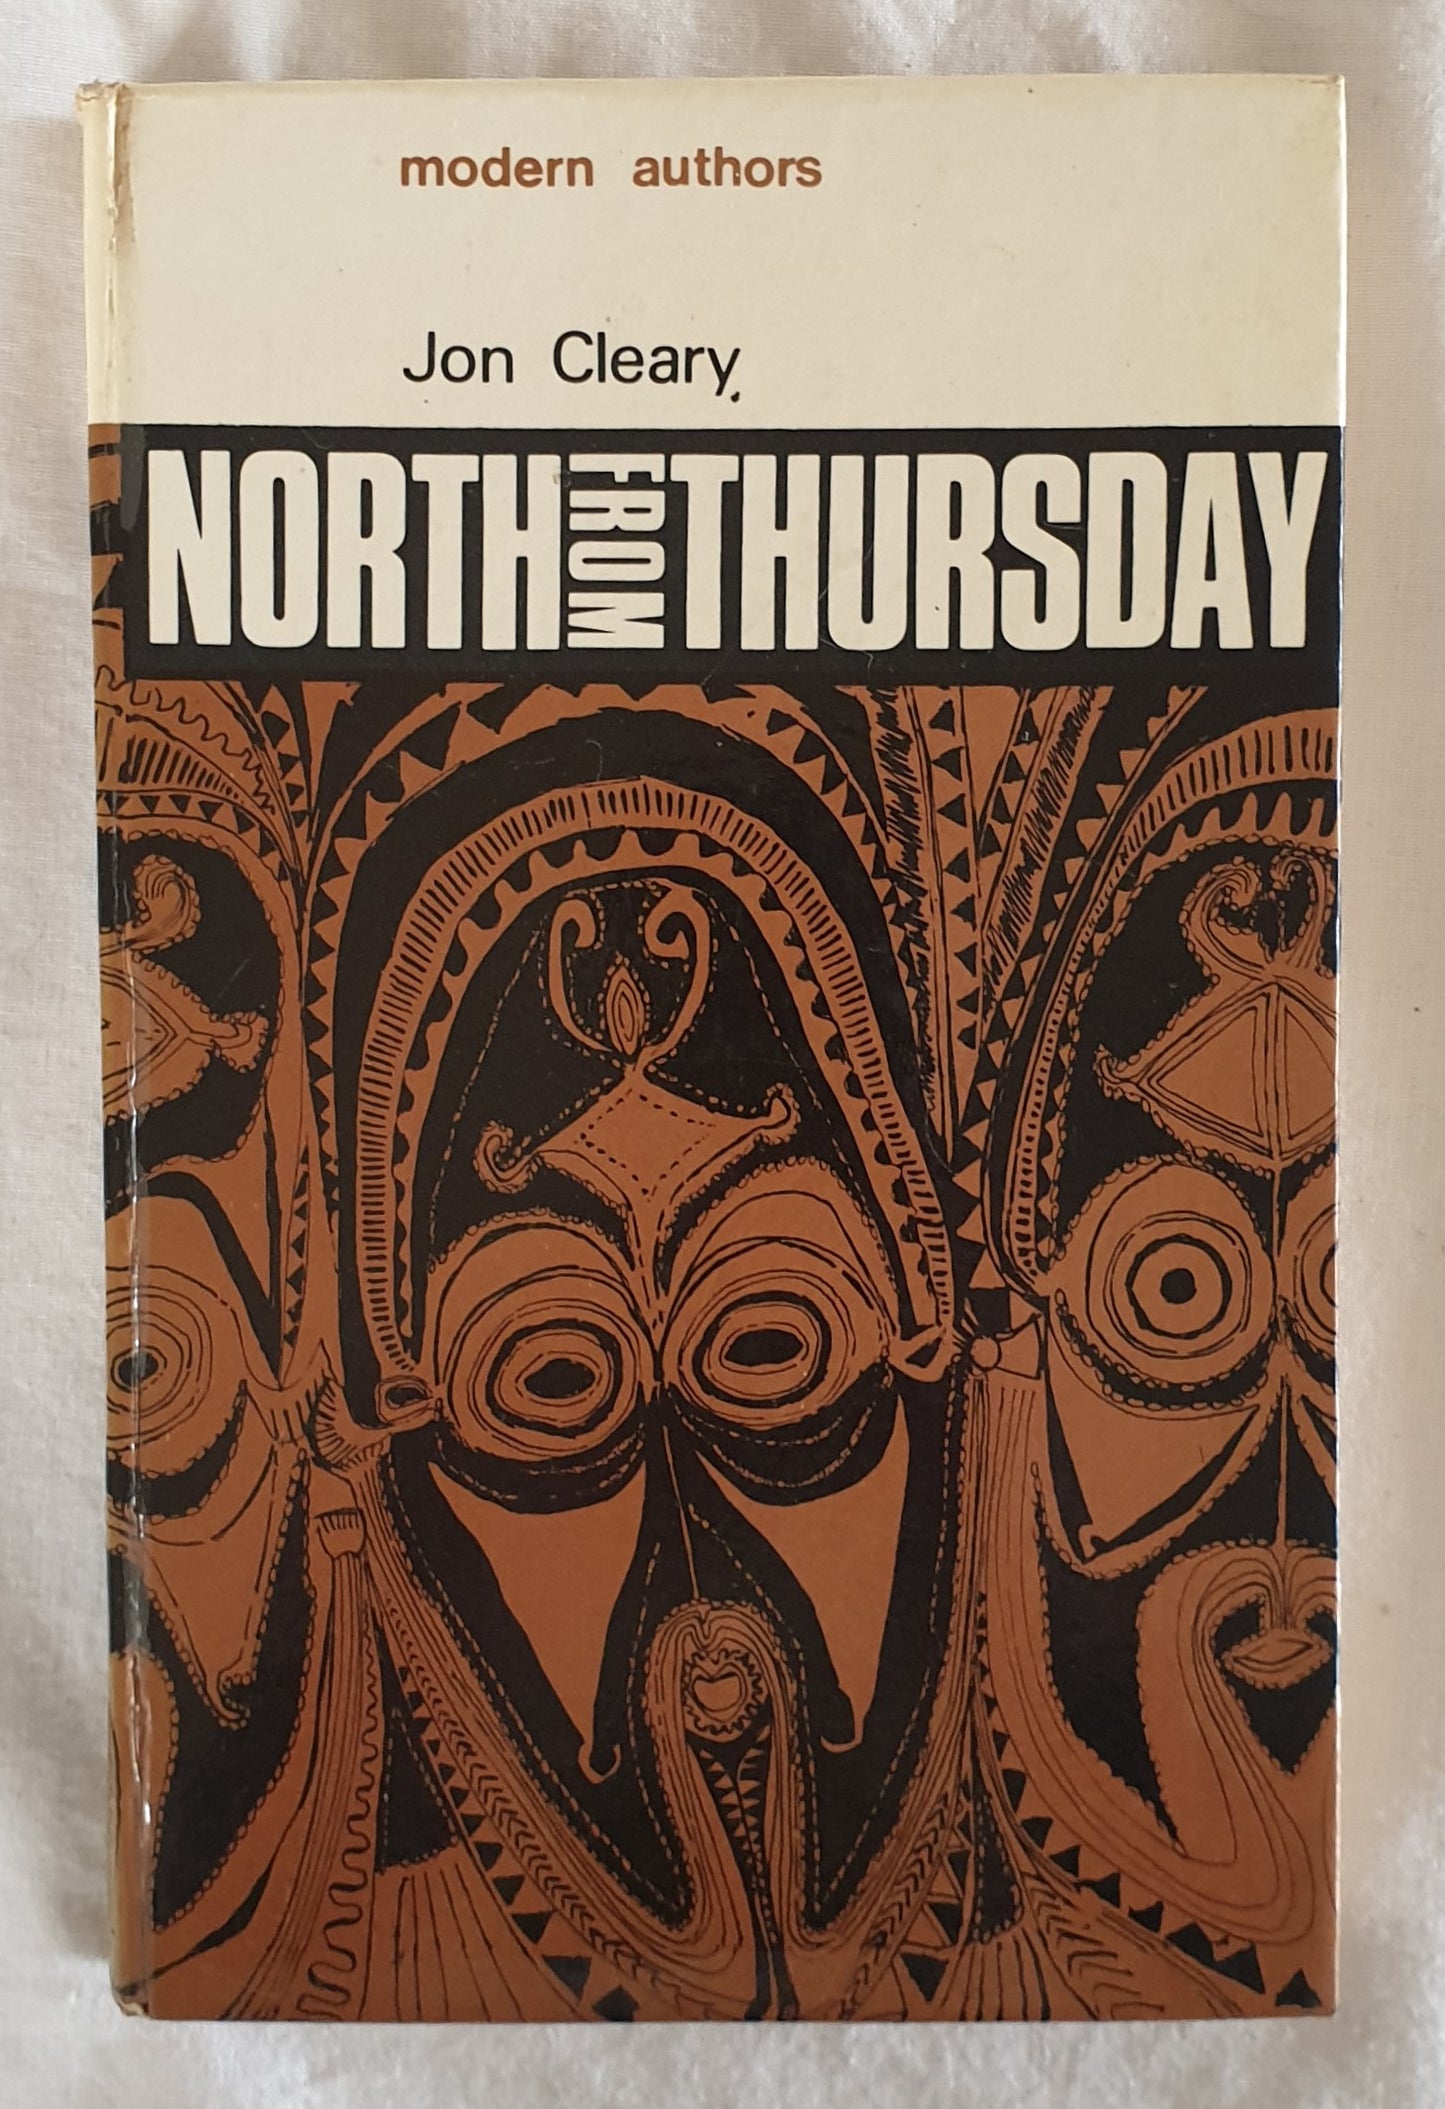 North From Thursday by Jon Cleary